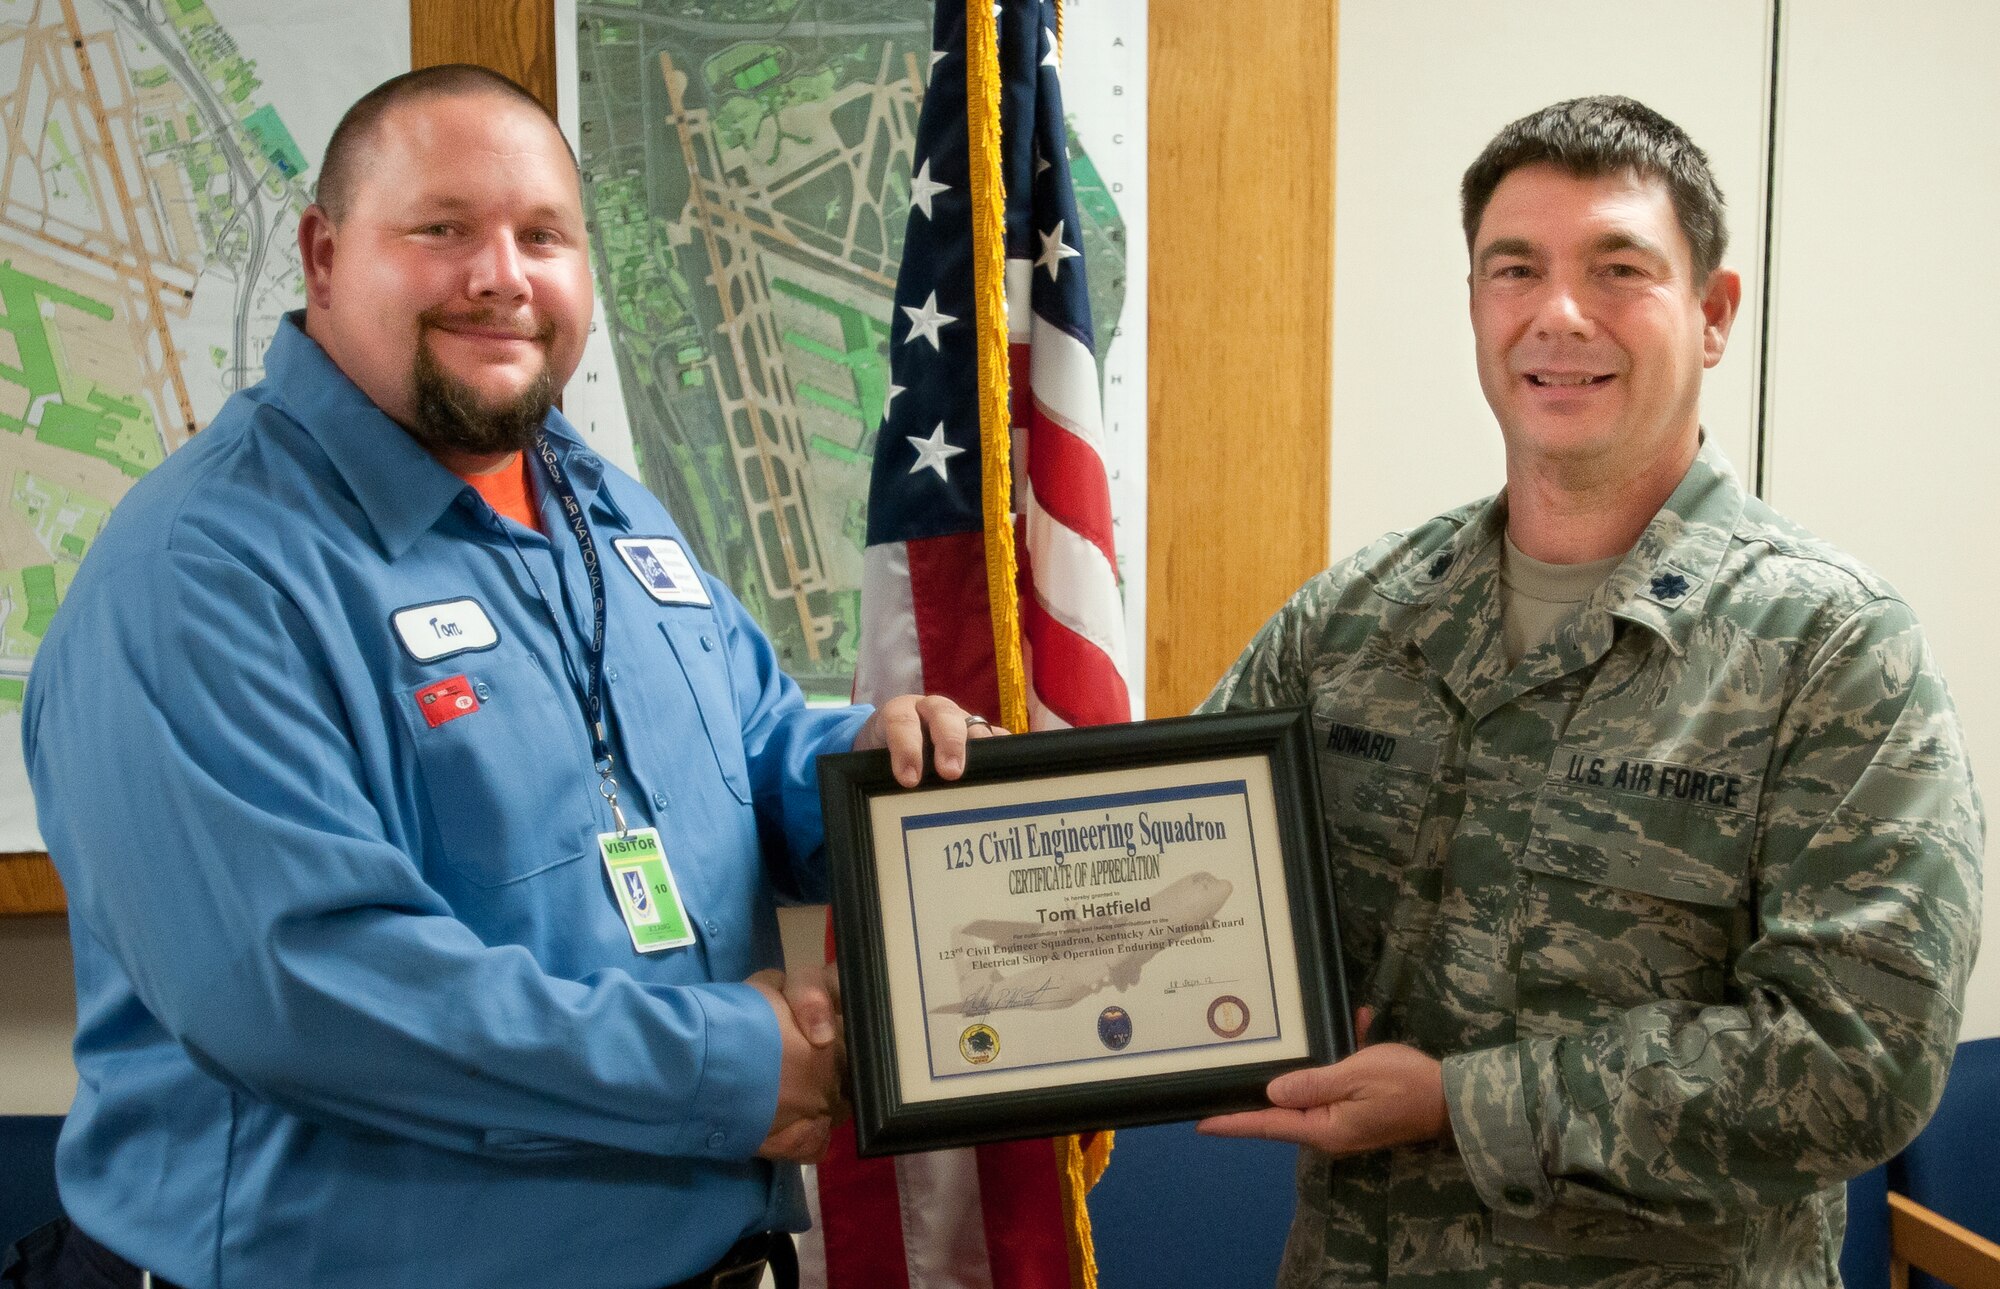 Kentucky Air National Guard Lt. Col. Phillip Howard, commander of the 123rd Civil Engineer Squadron, presents a certificate to Tom Hatfield, an airfield technician with the Louisville Regional Airport Authority in Louisville, Ky., on Sept. 21, 2012. Roy helped train Kentucky Air Guard civil engineers on the maintenance of commercial airfield lighting equipment, which enhanced their mission effectiveness during a 2011 deployment to Afghanistan. (Kentucky Air National Guard photo by Master Sgt. Phil Speck)